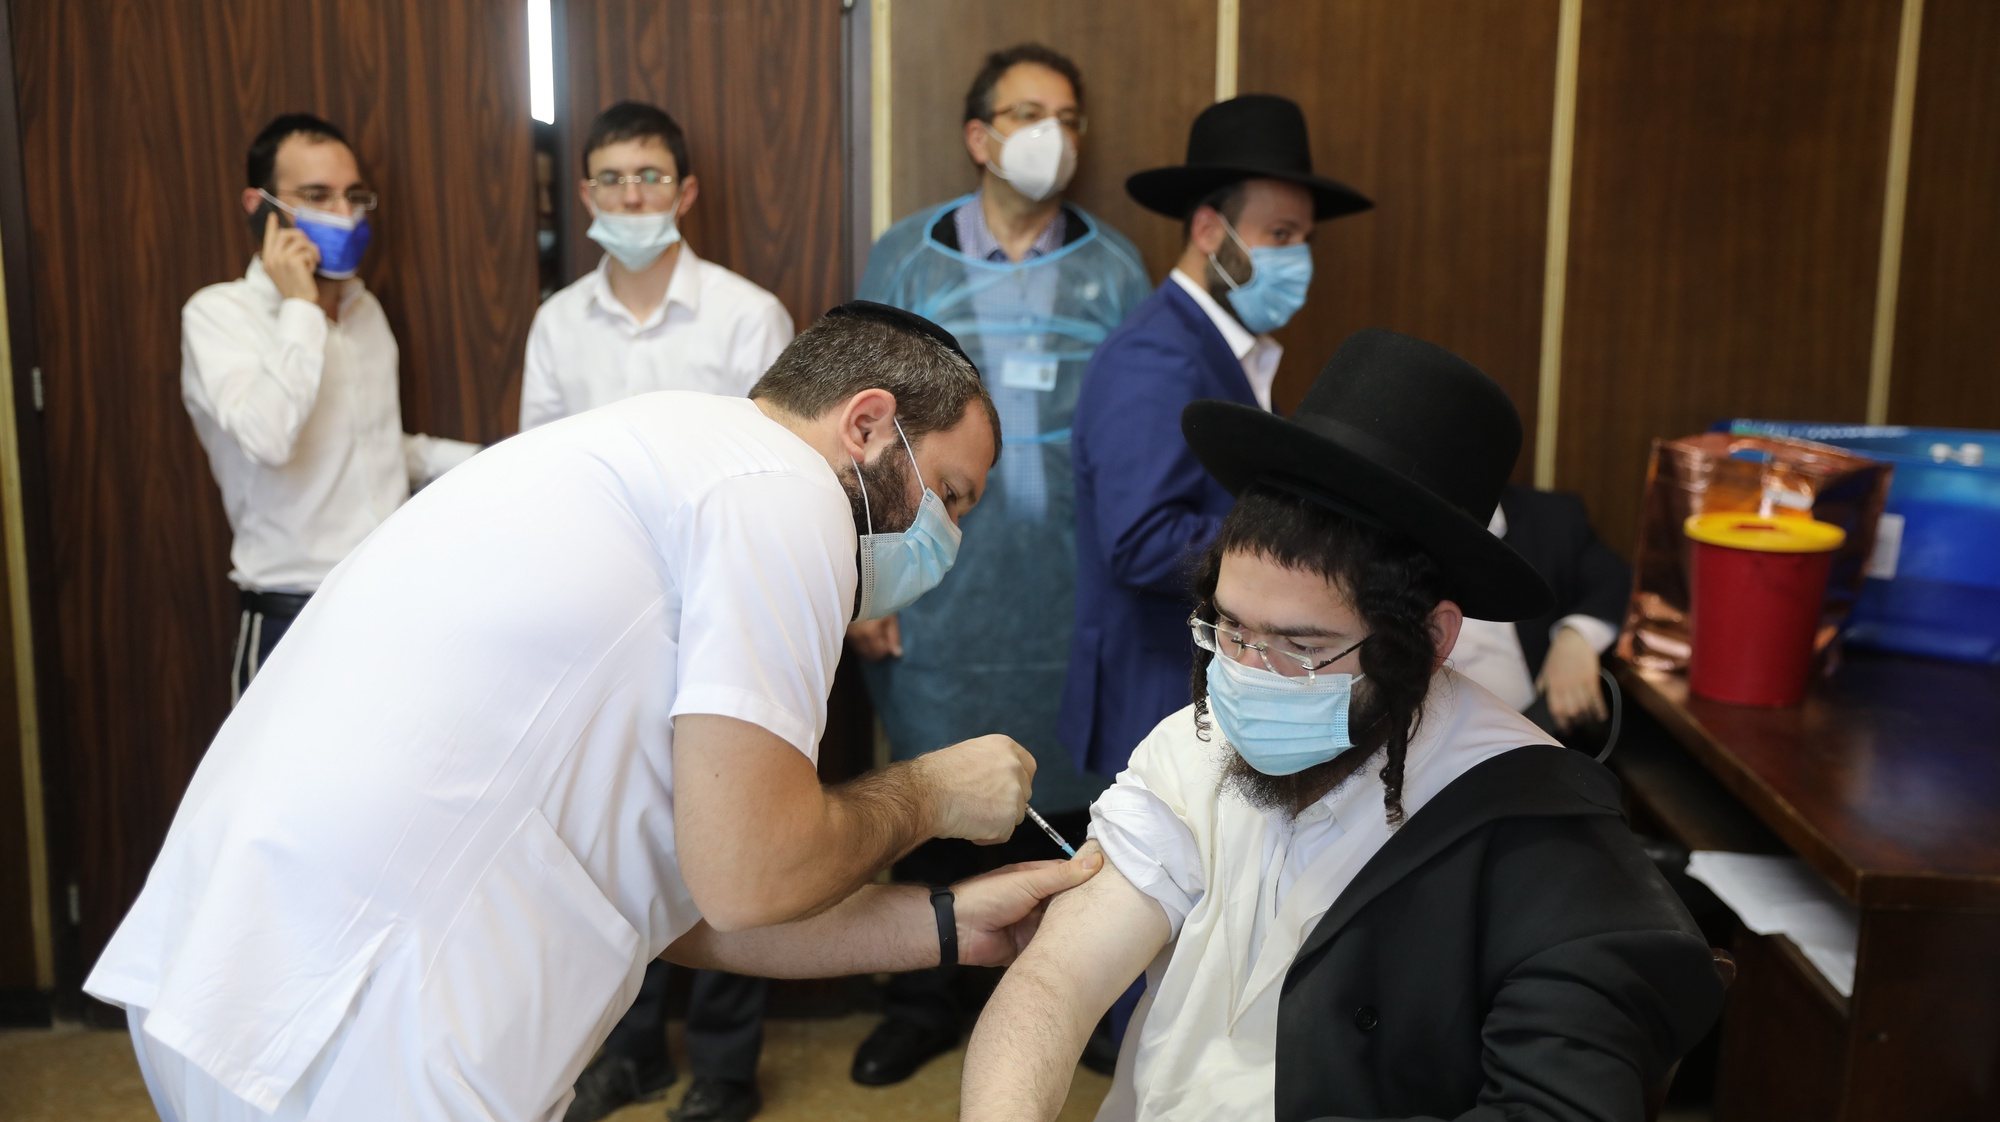 epa09004309 An Ultra orthodox Jewish man receives a COVID-19 vaccine from a nurse at Ichilov Medical Center in a Yeshiva at the Ultra orthodox city of Bnei Brak, Israel, 11 February 2021. Israel begin a vaccinations campaign at the ultra orthodox community, as Israel has so far vaccinated over three million of its around nine million citizens with the first dose of the coronavirus and two million have been given the second dose  EPA/ABIR SULTAN